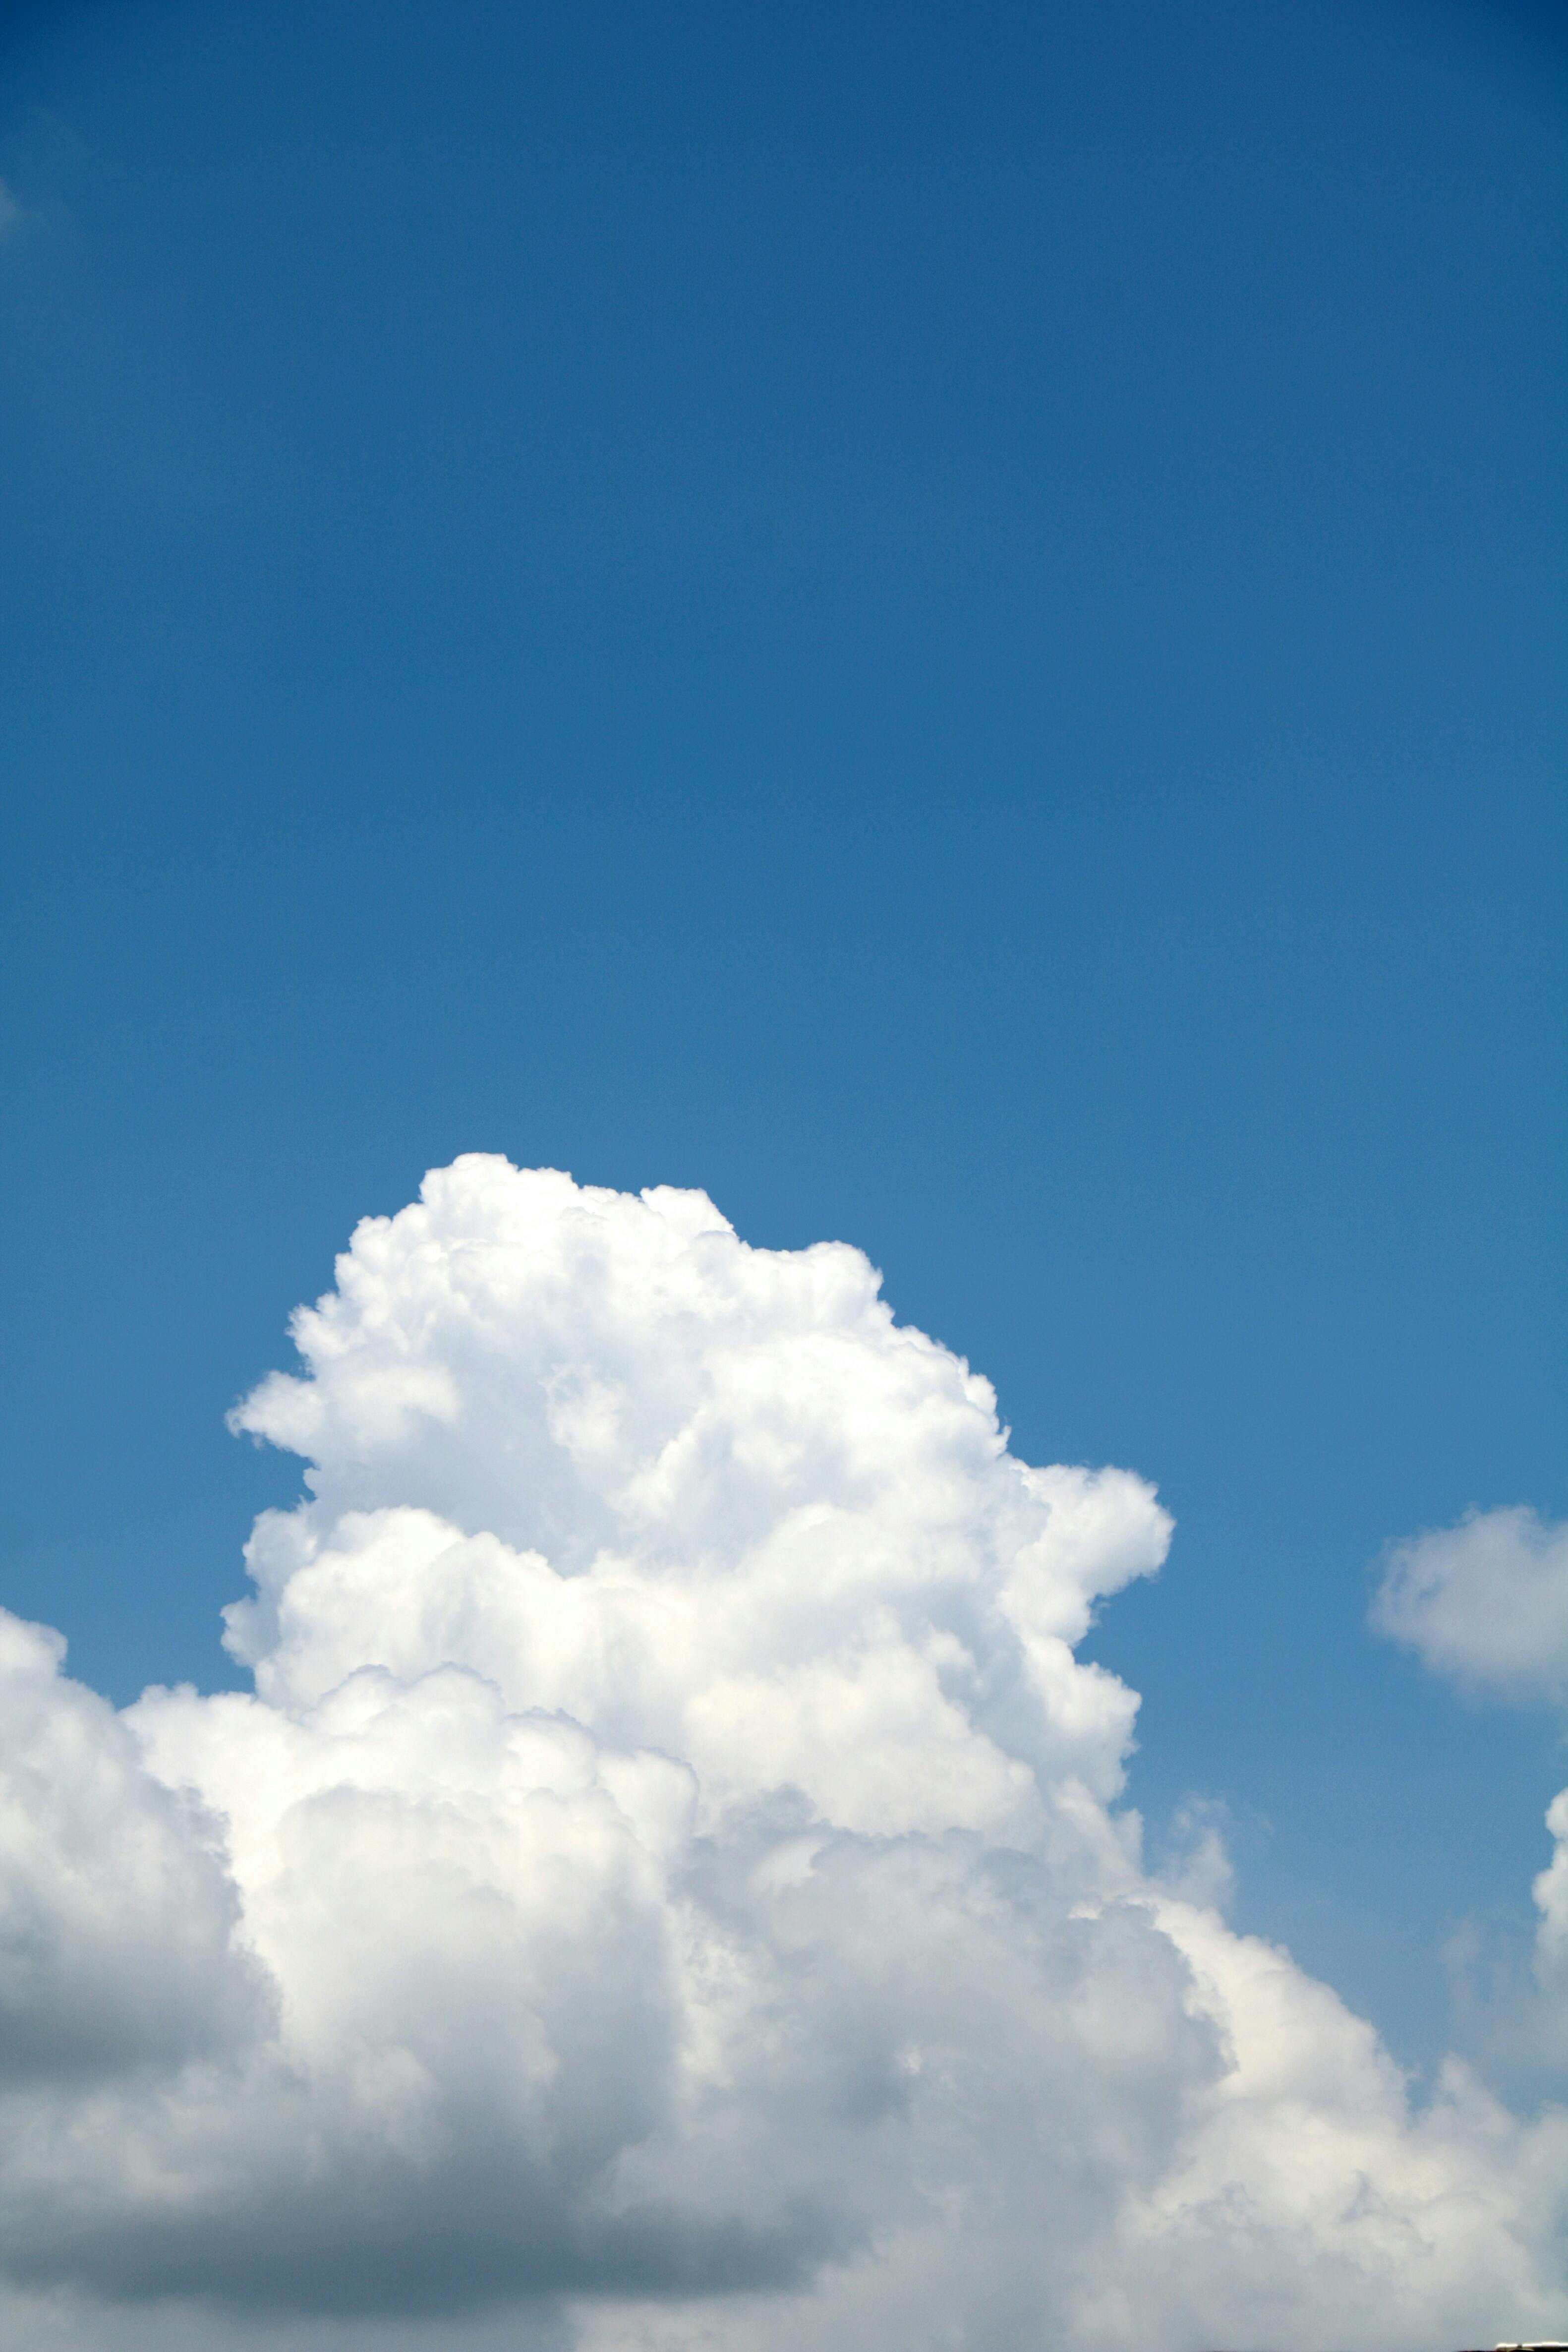 Premium Photo  Blue clouds wallpaper iphone background this wallpaper is  perfect for iphone x backgrounds mobile screensaver and has a blue sky  background blue sky wallpaper blue wallpaper iphone